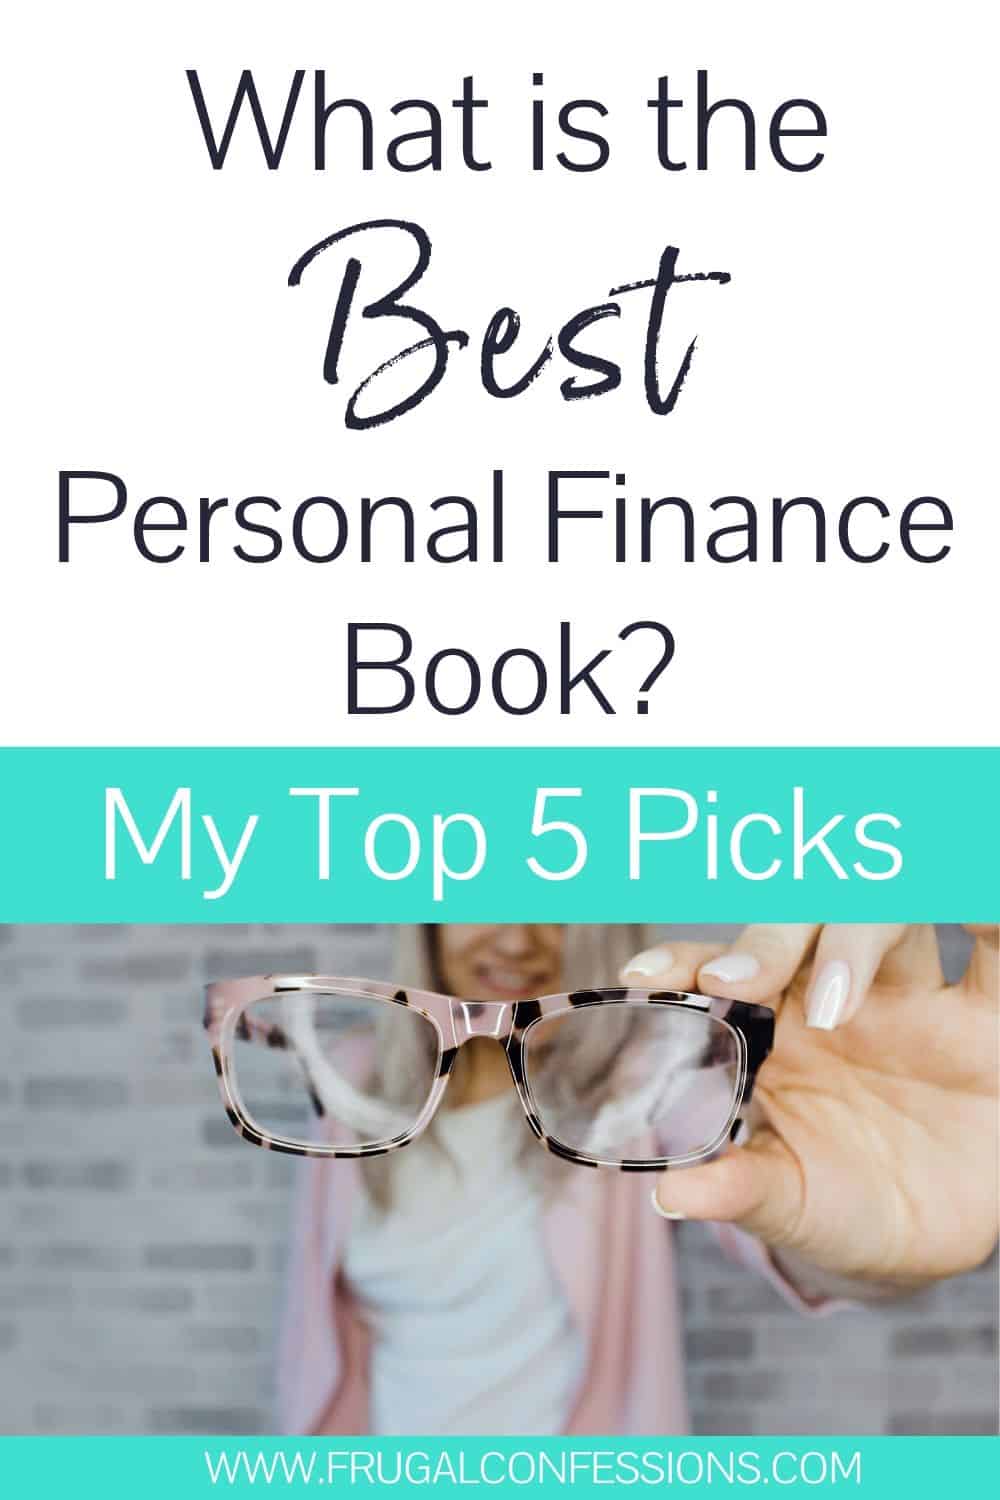 Woman holding black and pink frame reading glasses up, text overlay "what is the best personal finance book? My top 5 picks"